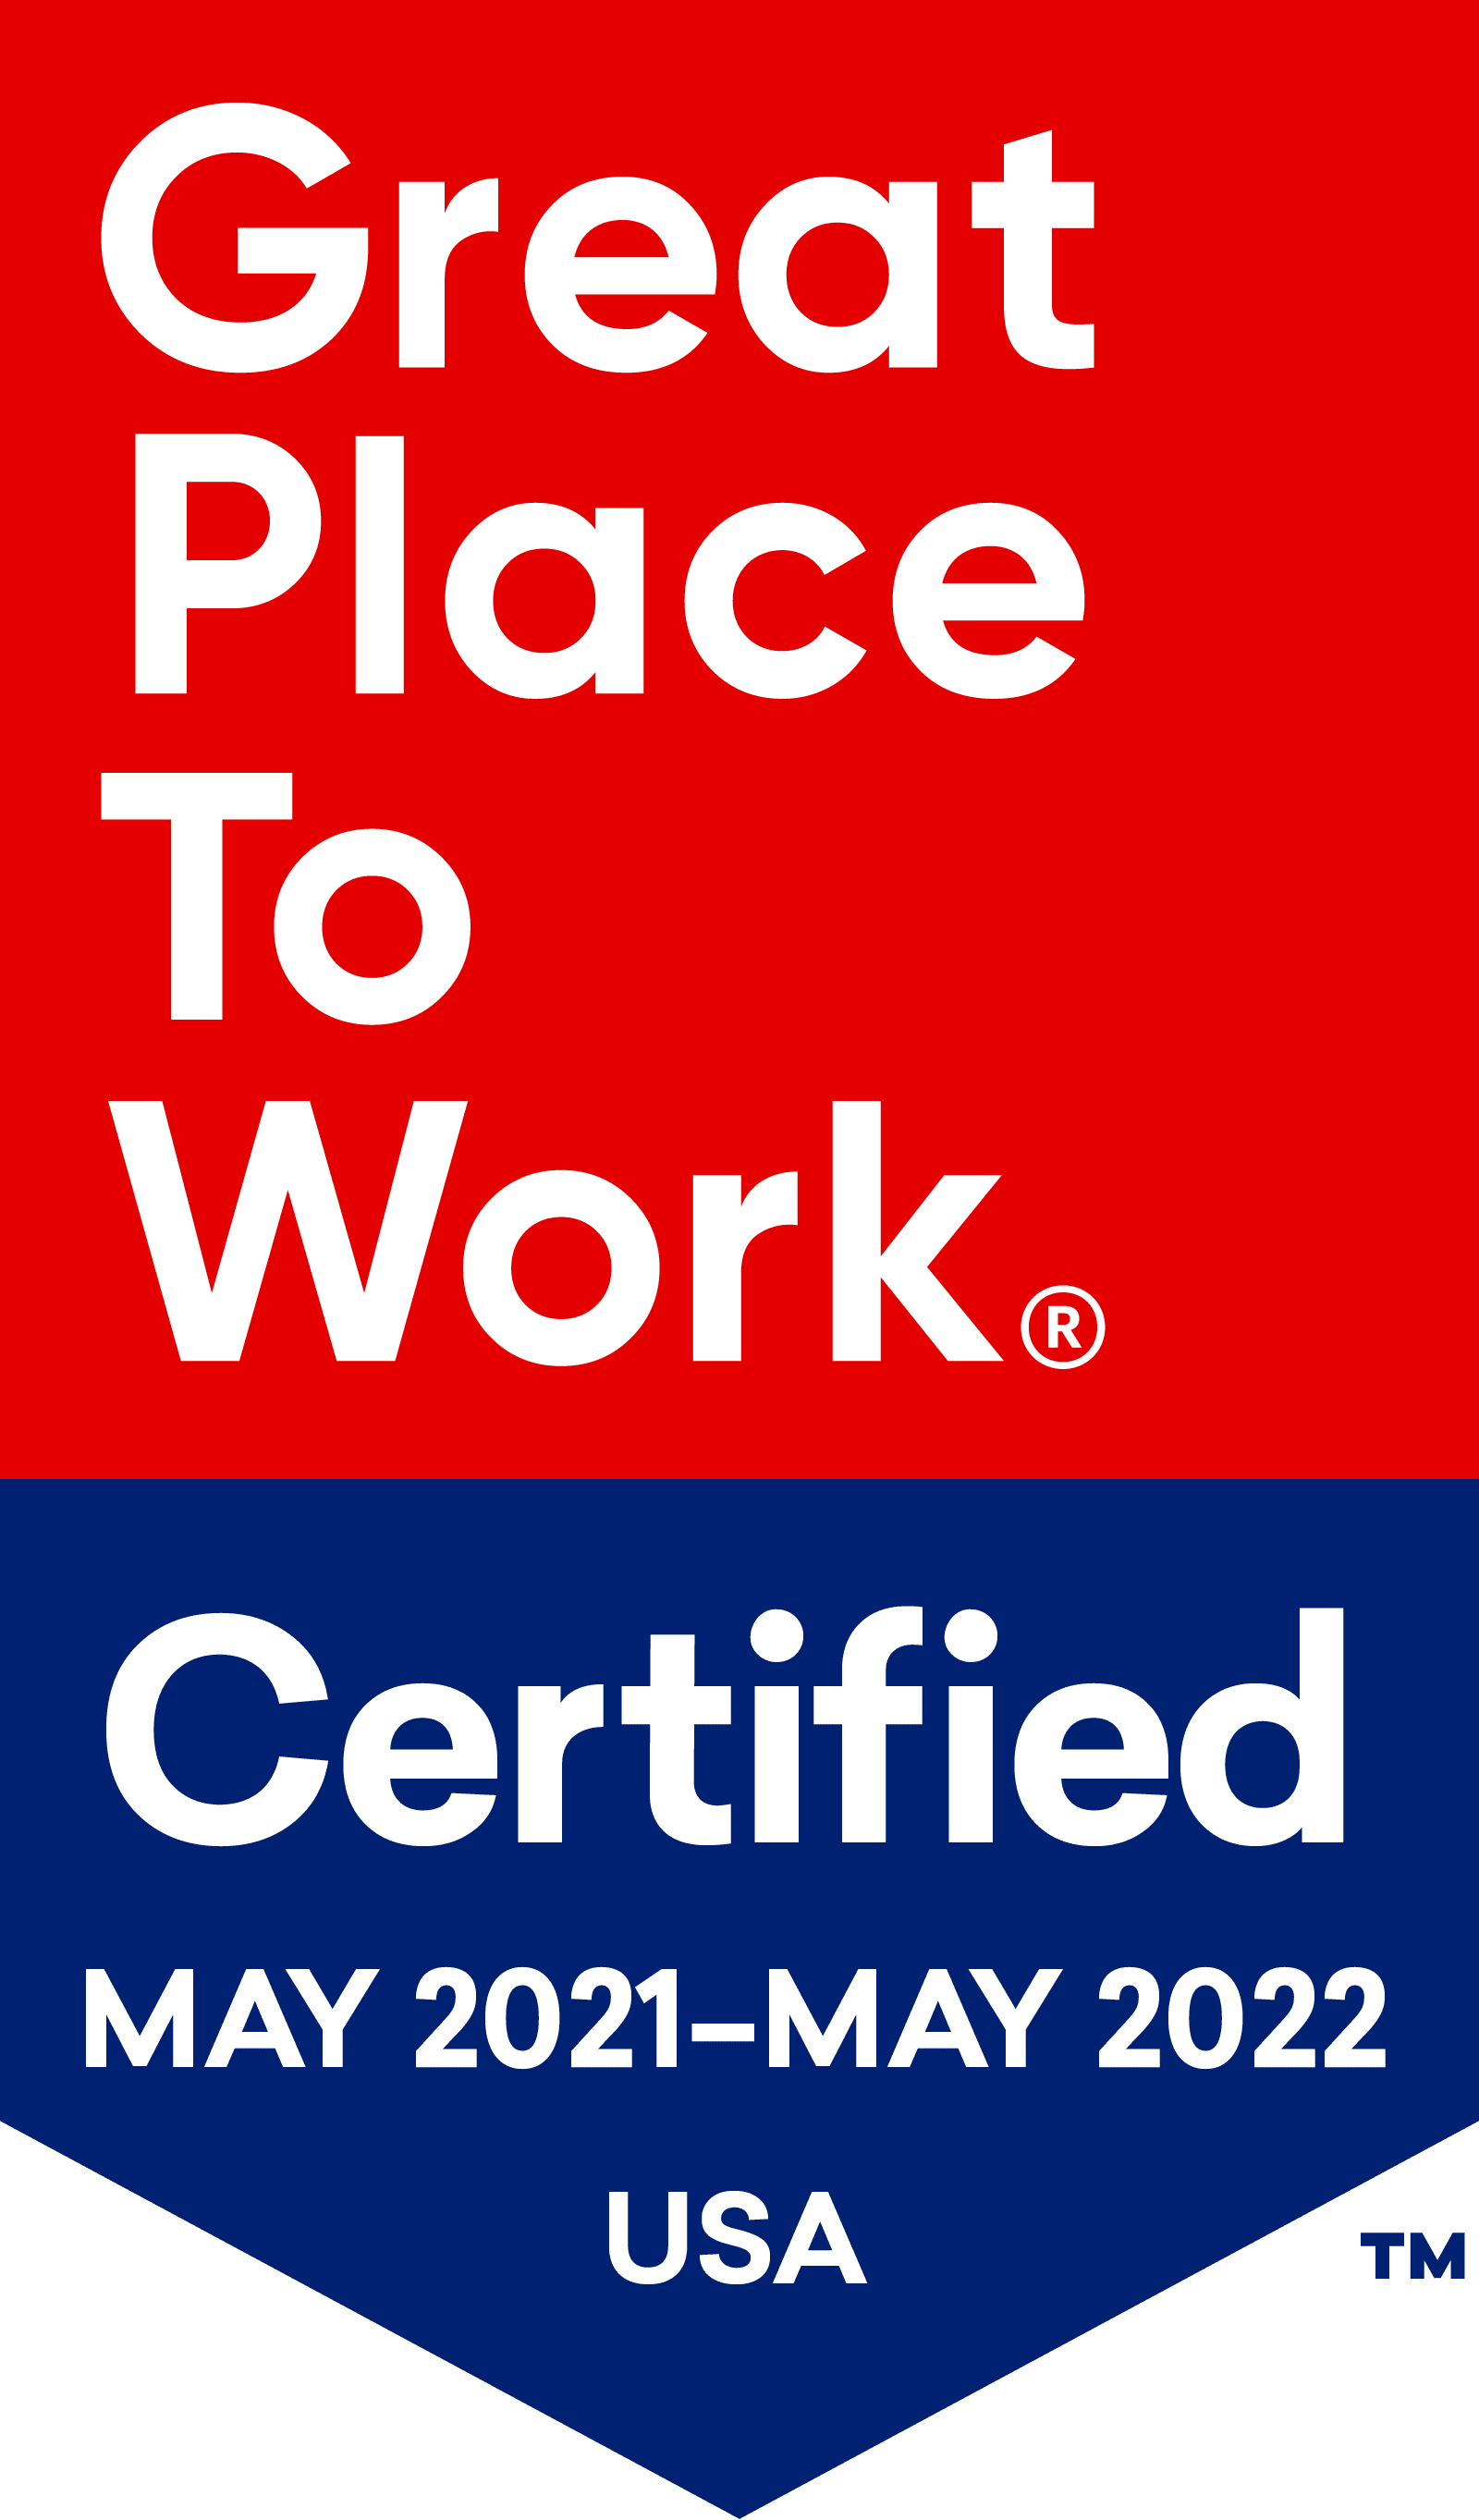 McDowell Village is Great Place To Work Certified